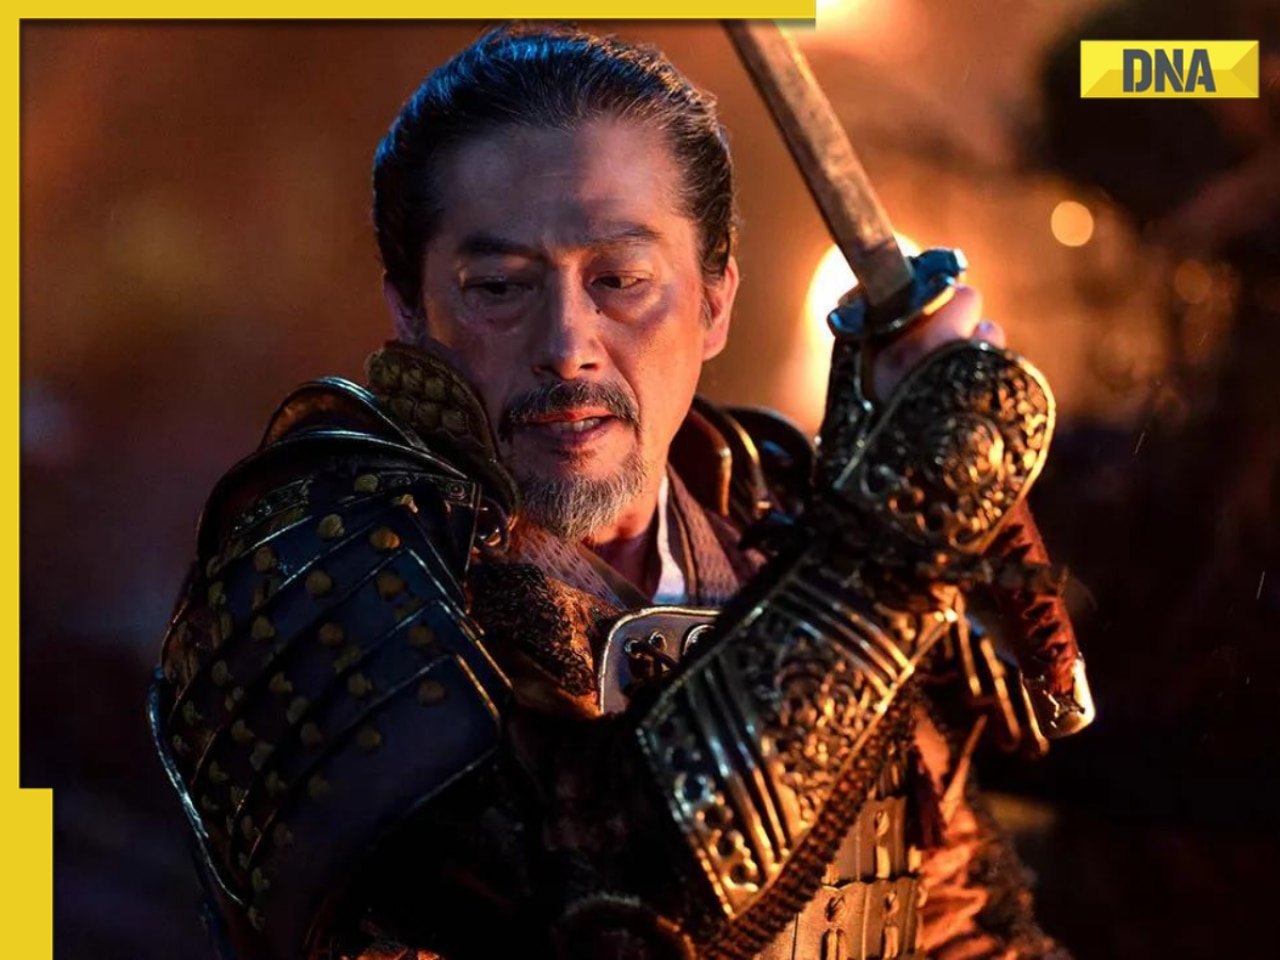 Shogun review: This masterclass in storytelling is a visual delight, made even better by a flawless Hiroyuki Sanada